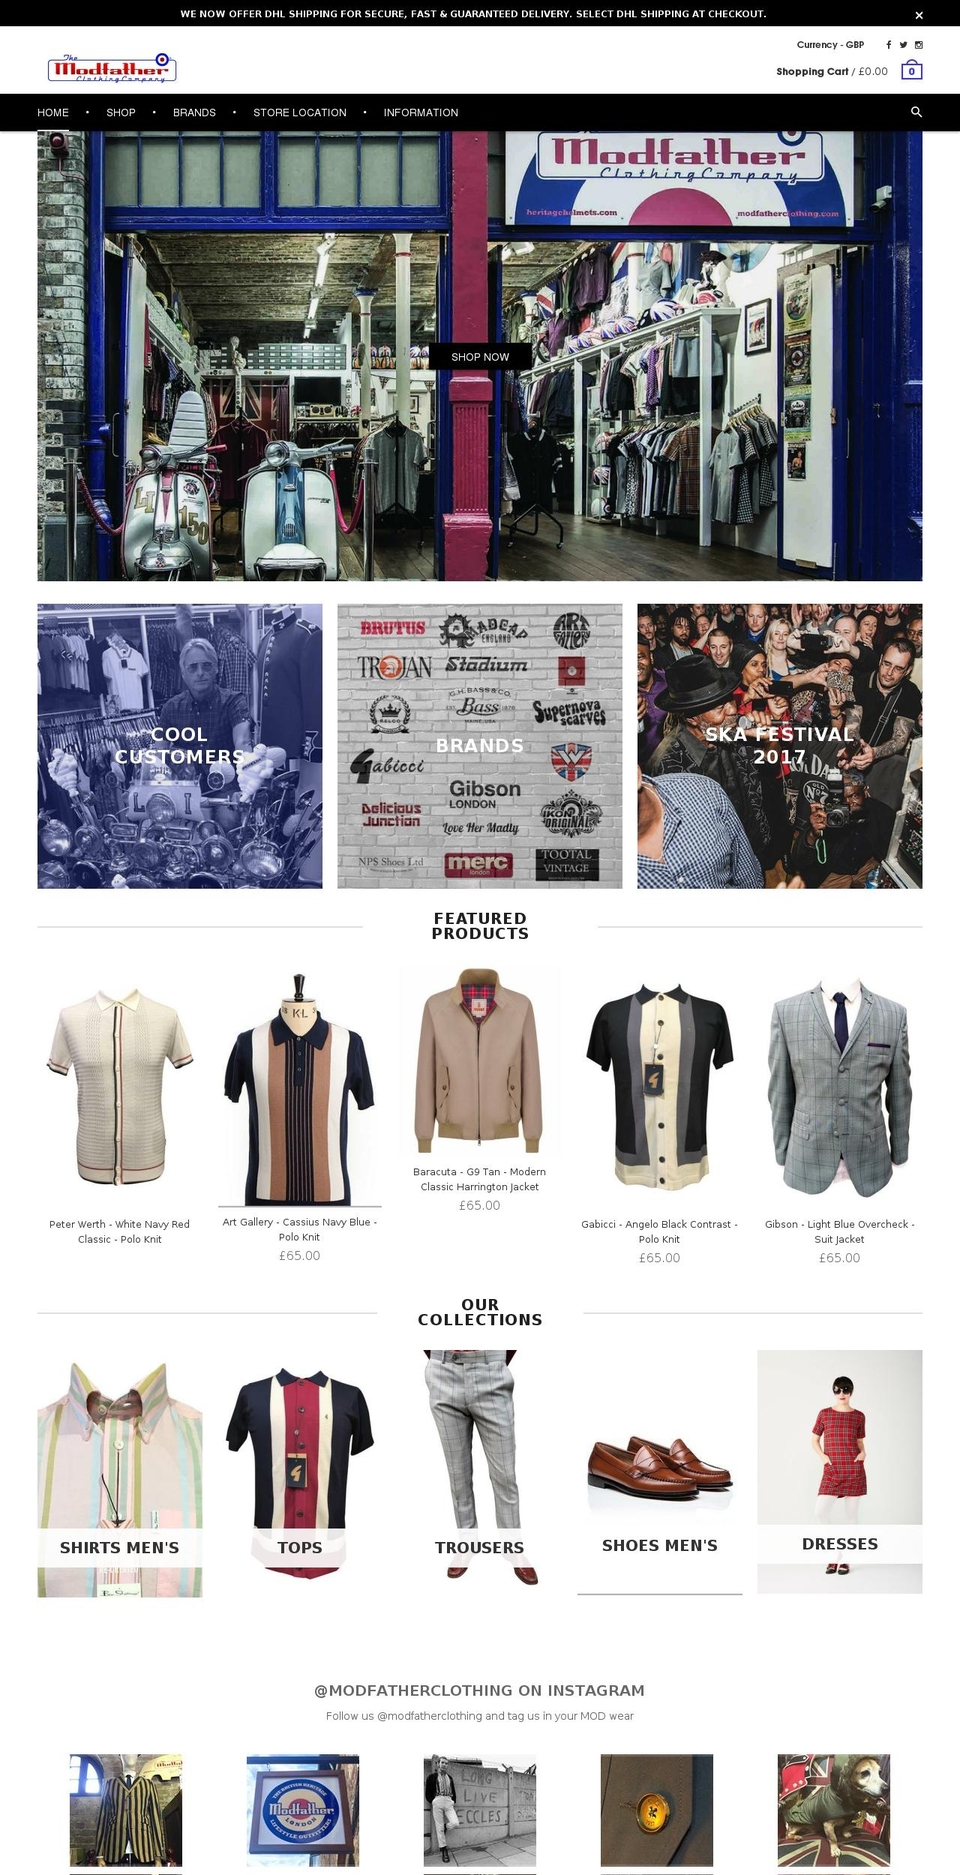 Canopy Shopify theme site example modfatherclothing.com